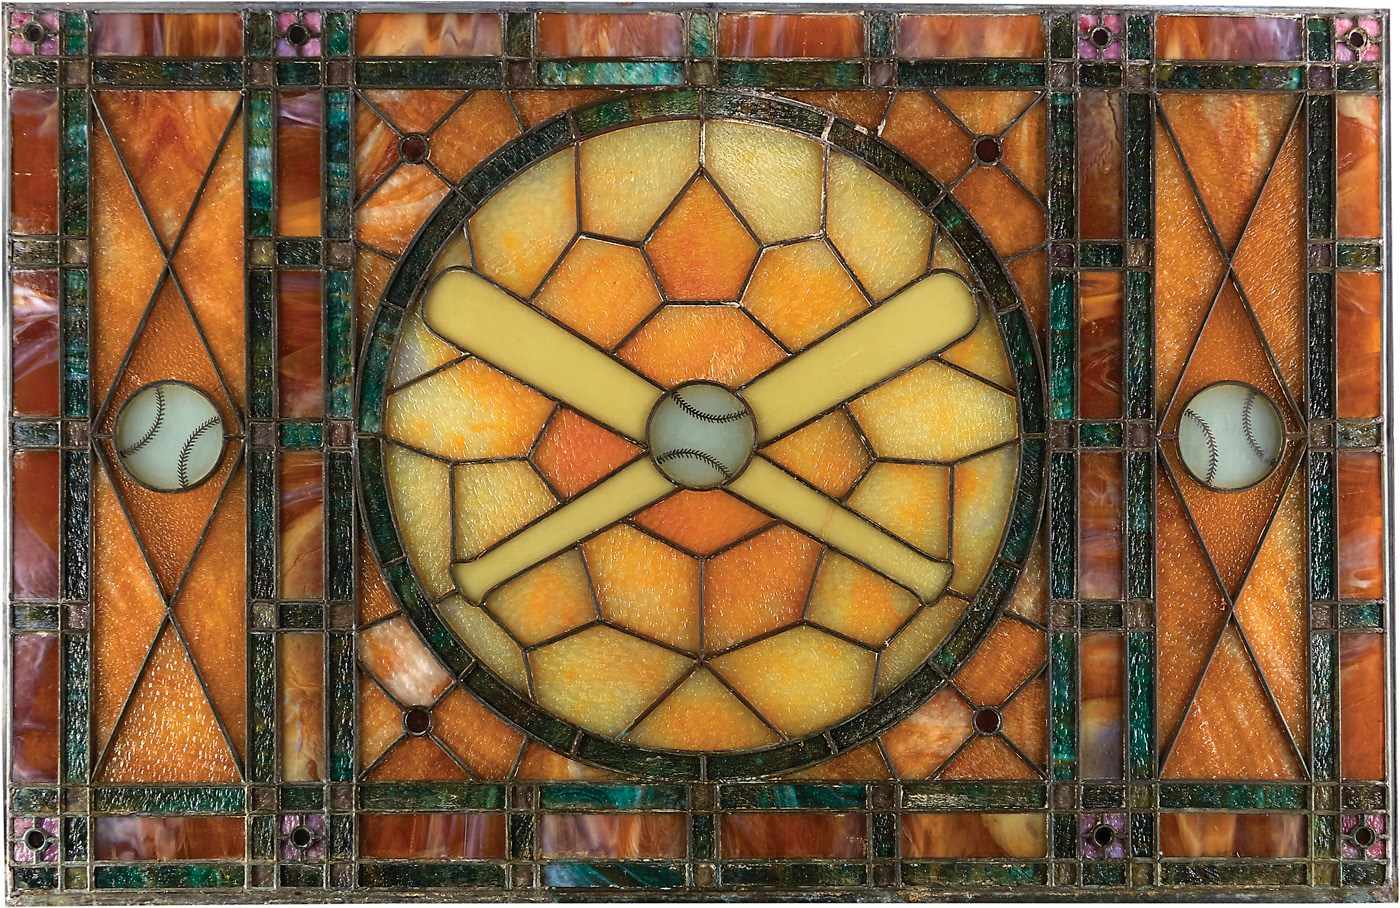 - Stunning Early 1900s Baseball Stained Glass Window from Johnny Kling's Pool Hall